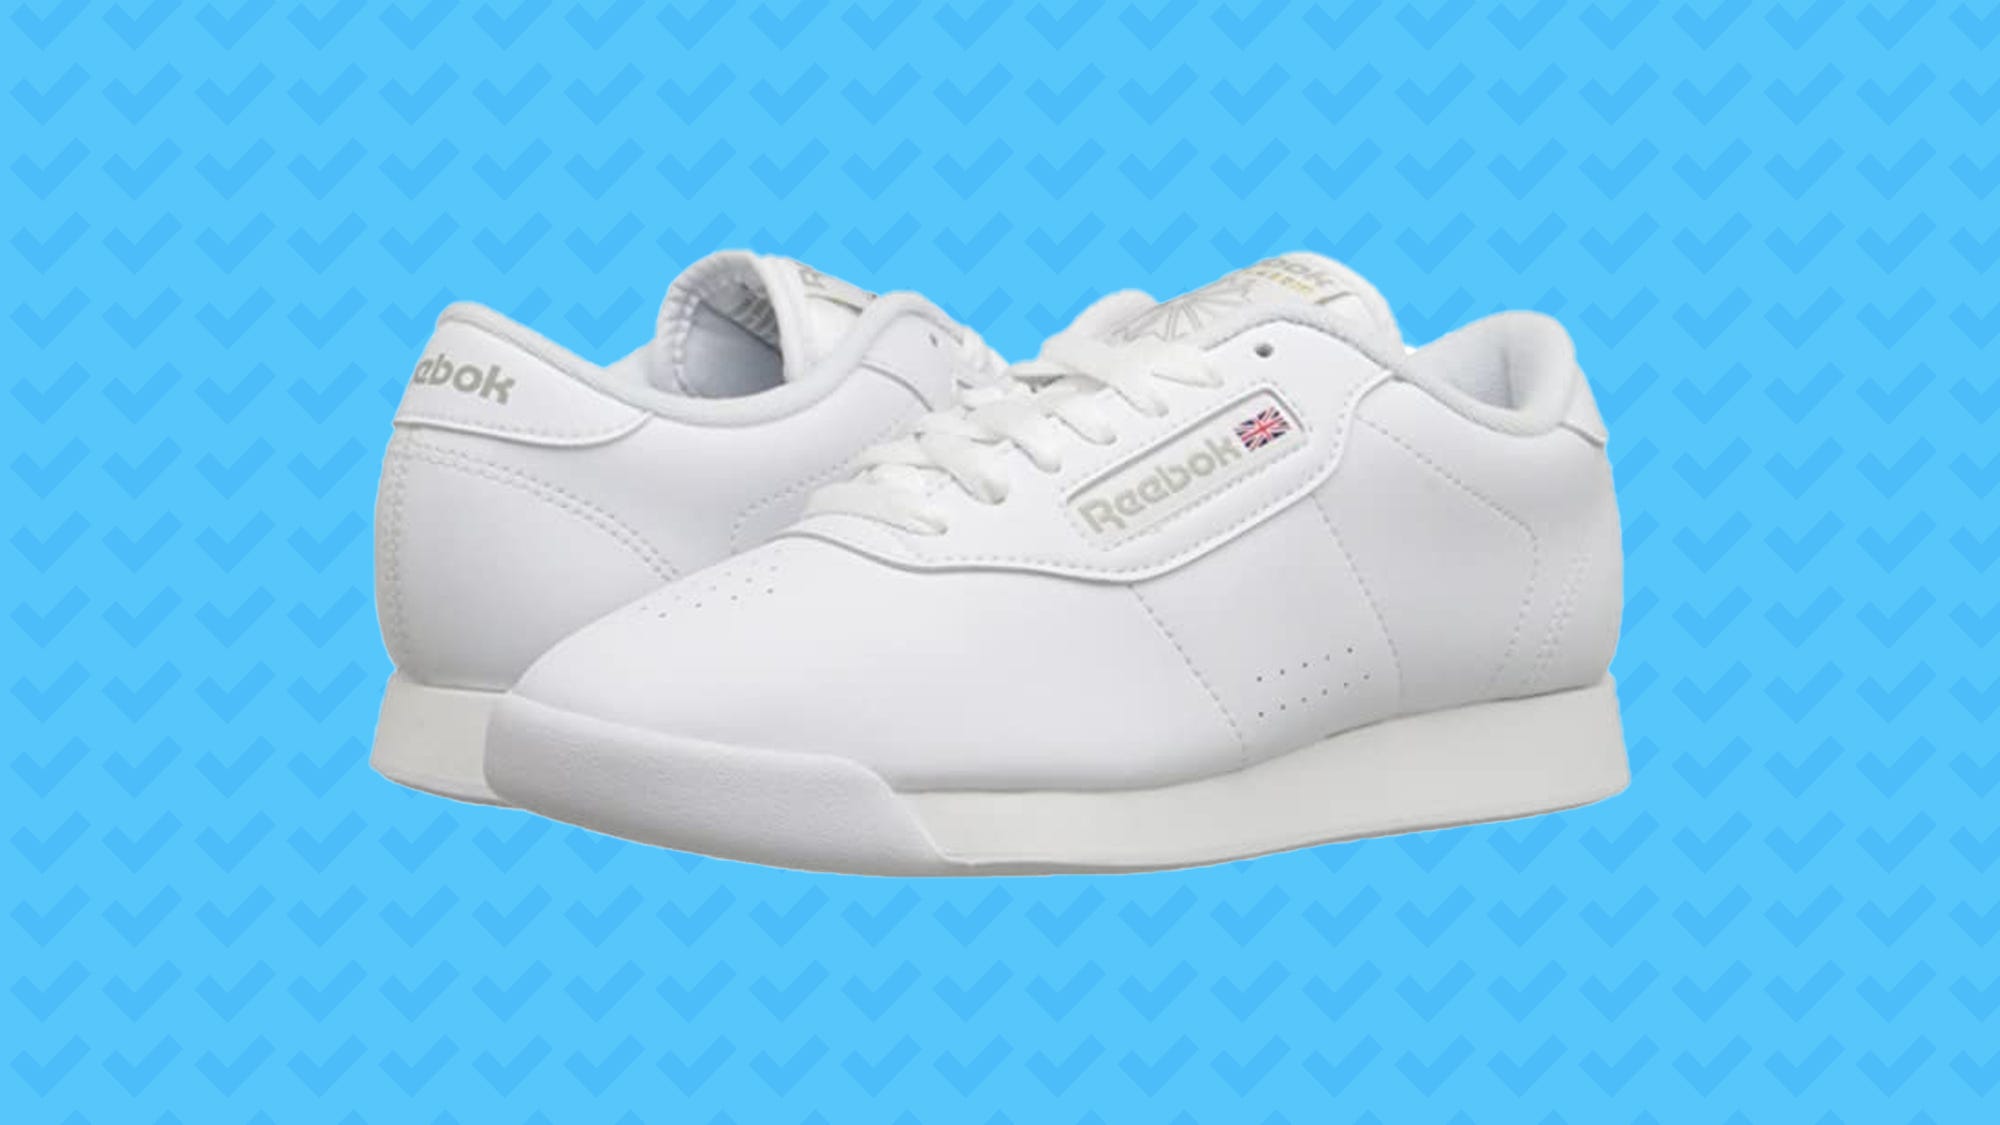 reebok shoes without less